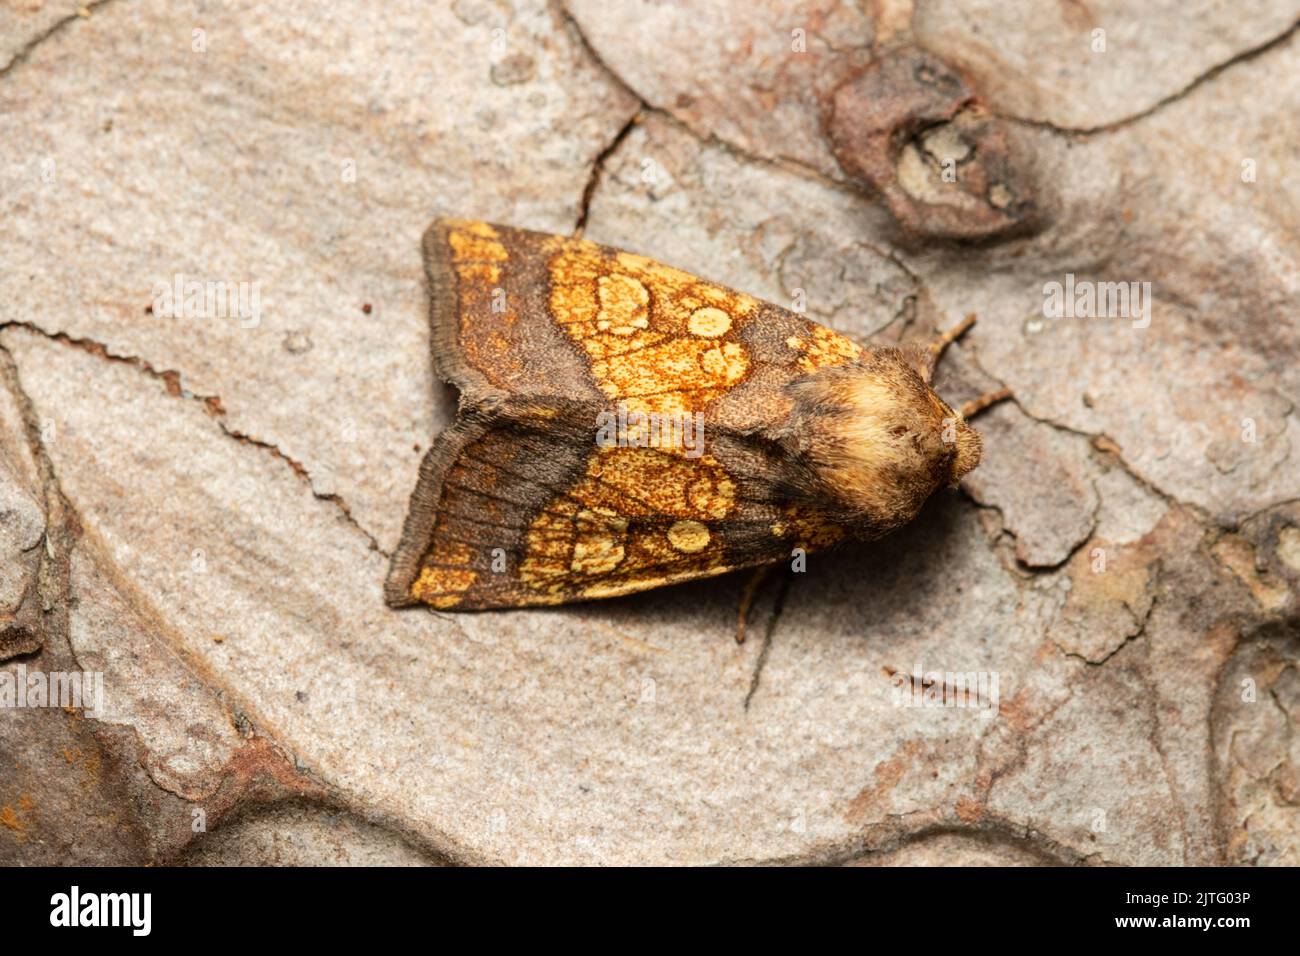 A Frosted Orange moth, Gortyna flavago, resting on tree bark. Stock Photo